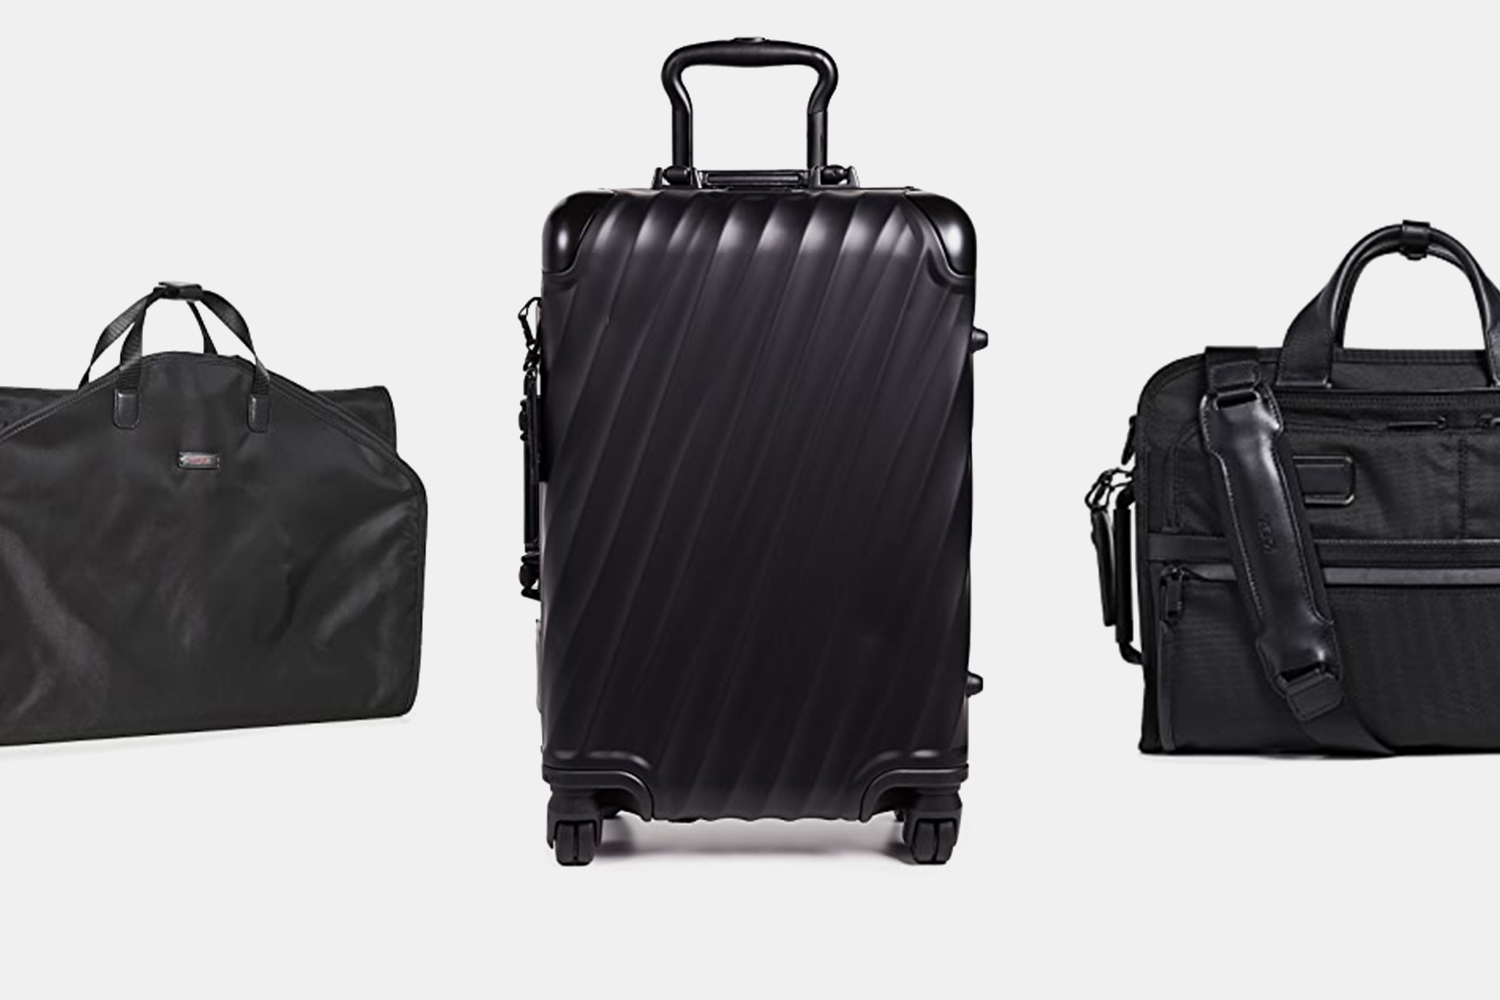 Tumi Garment Bag, Carry-On Suitcase, Briefcase